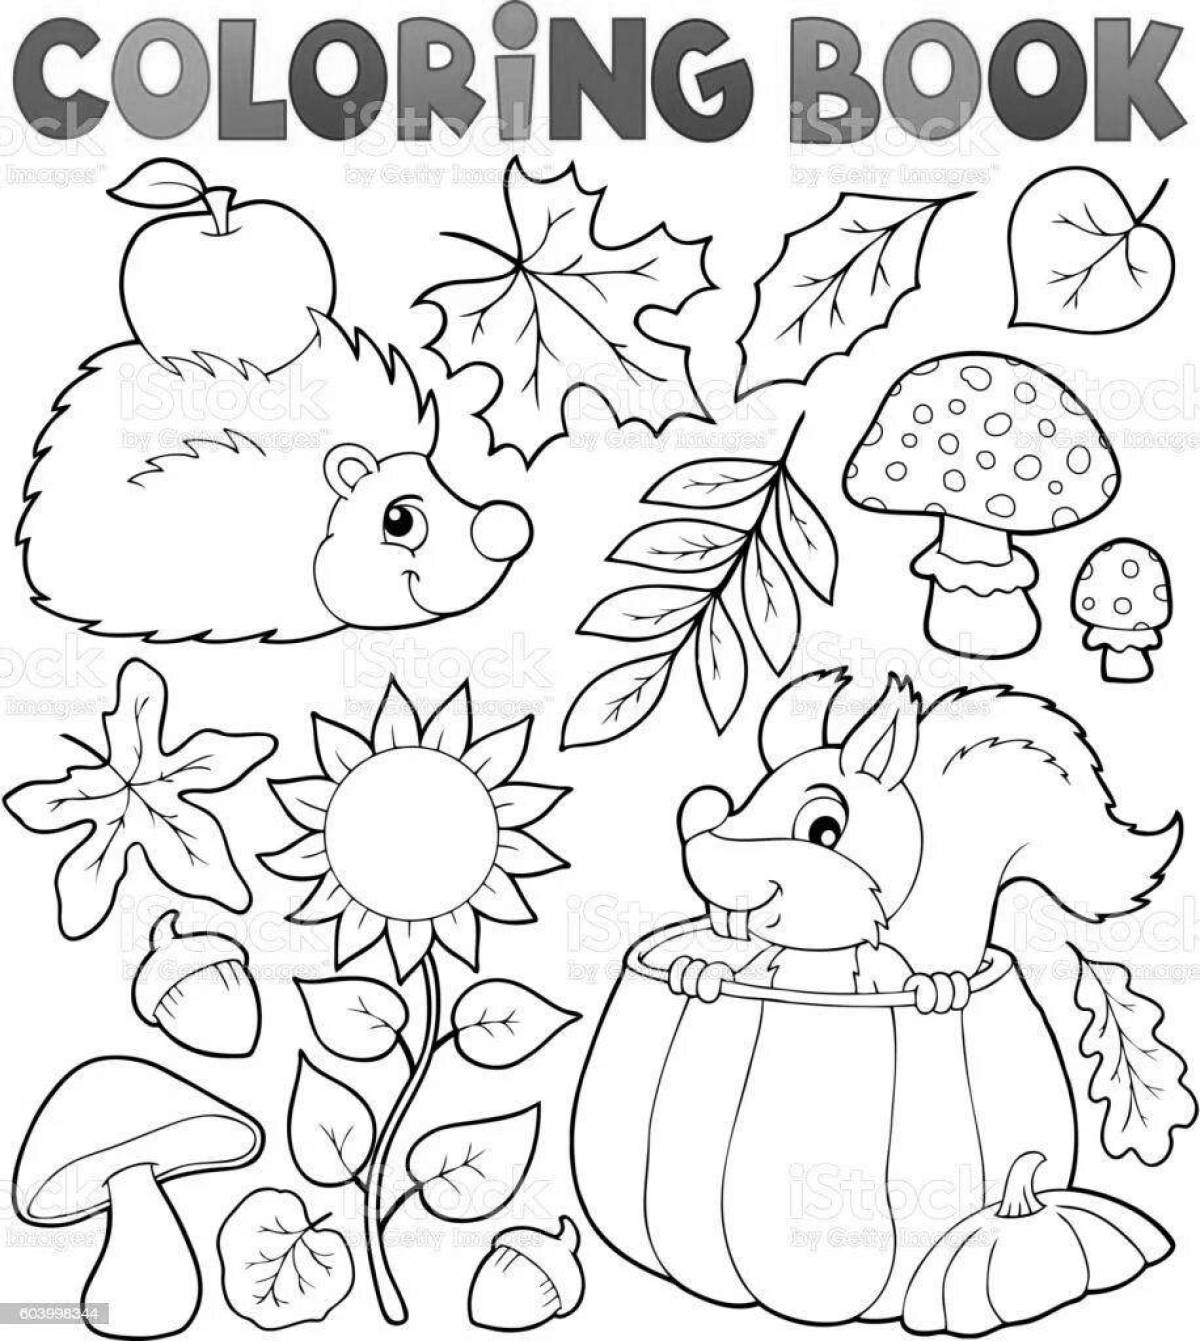 Great autumn coloring book for 6-7 year olds